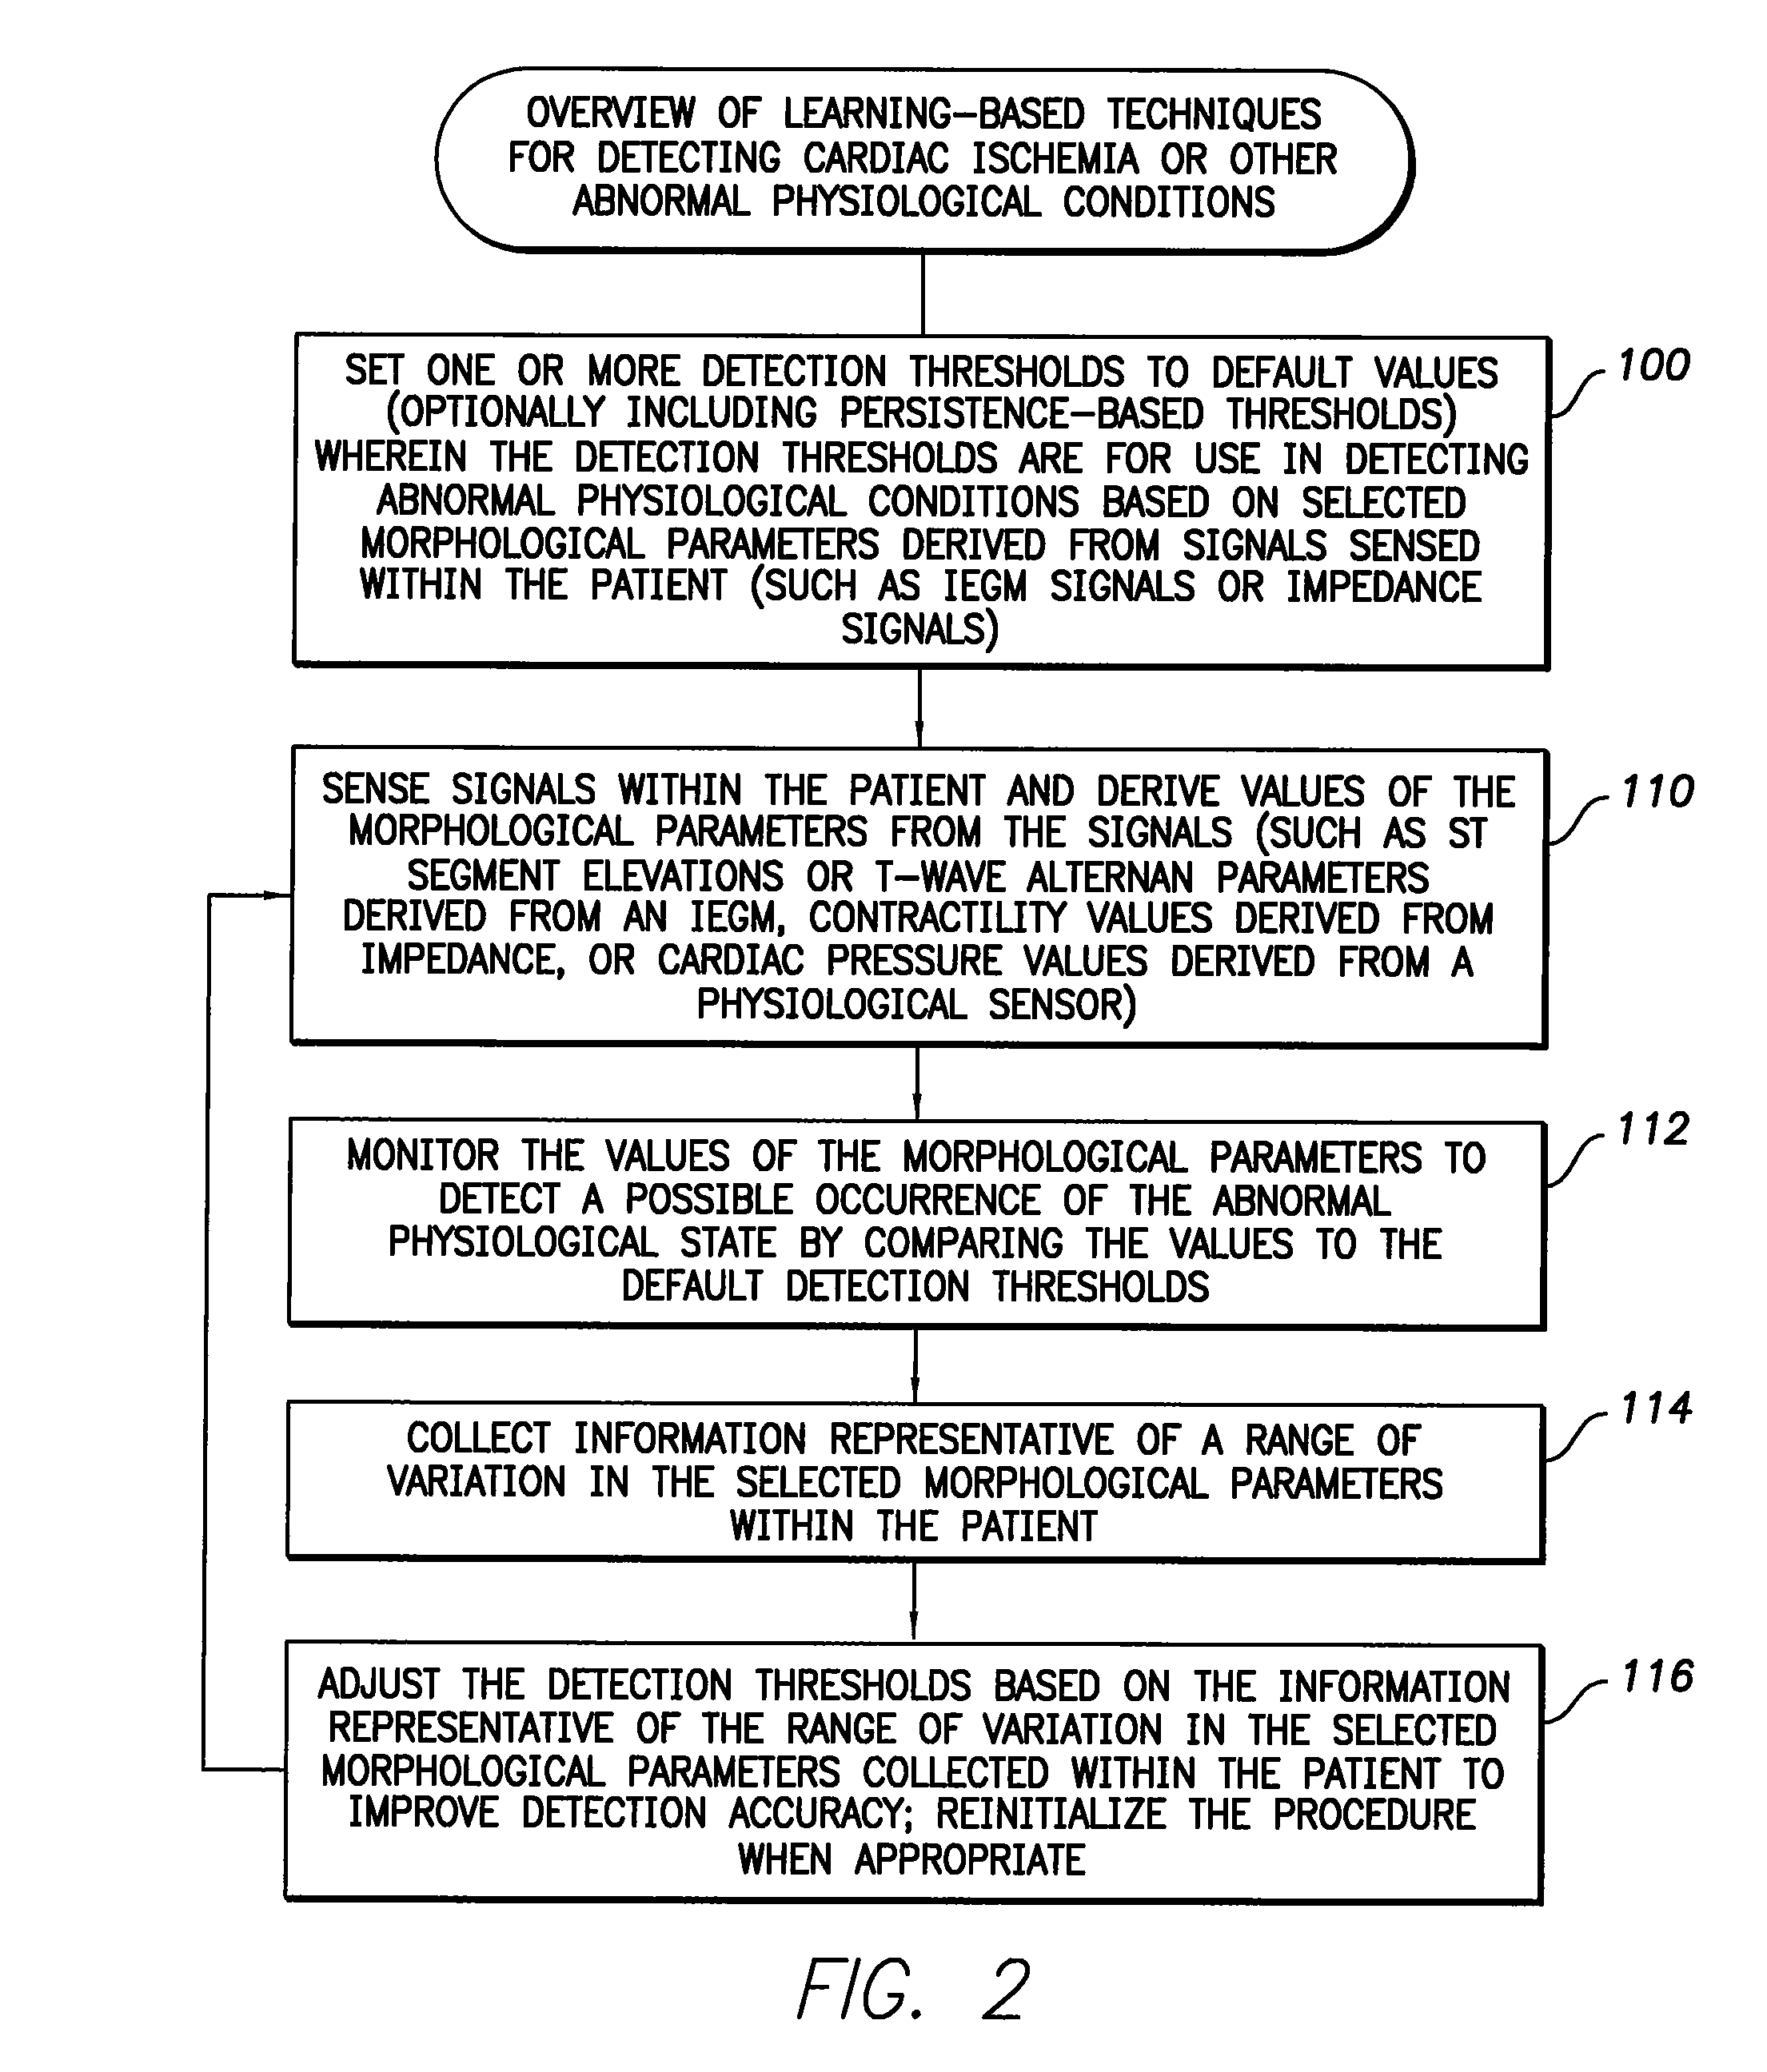 System and method for adaptively adjusting cardiac ischemia detection thresholds and other detection thresholds used by an implantable medical device